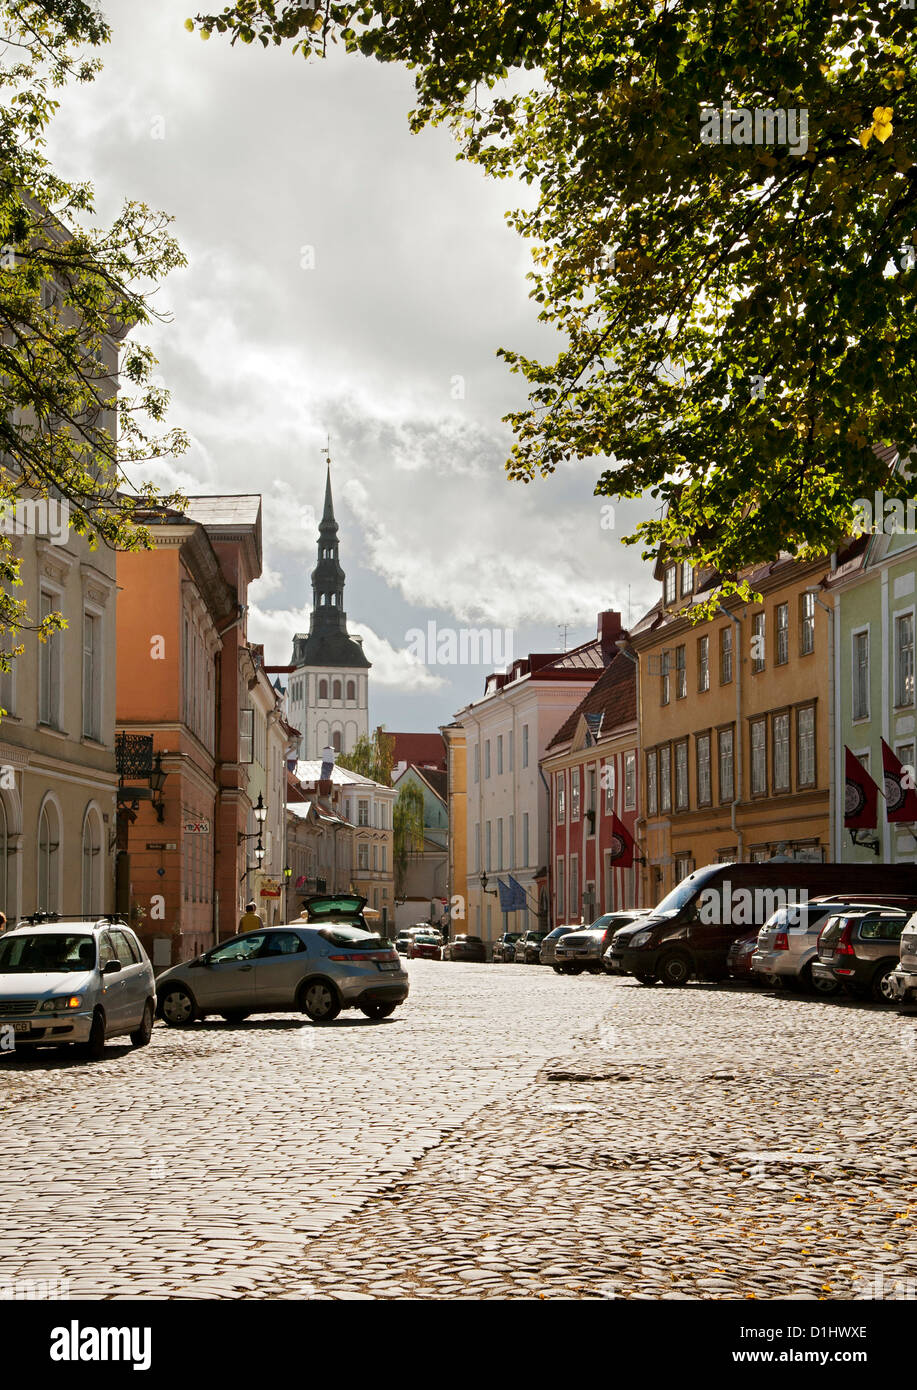 View of St. Nicholas' Church steeple from a street in the old town in Tallinn, the capital of Estonia. Stock Photo